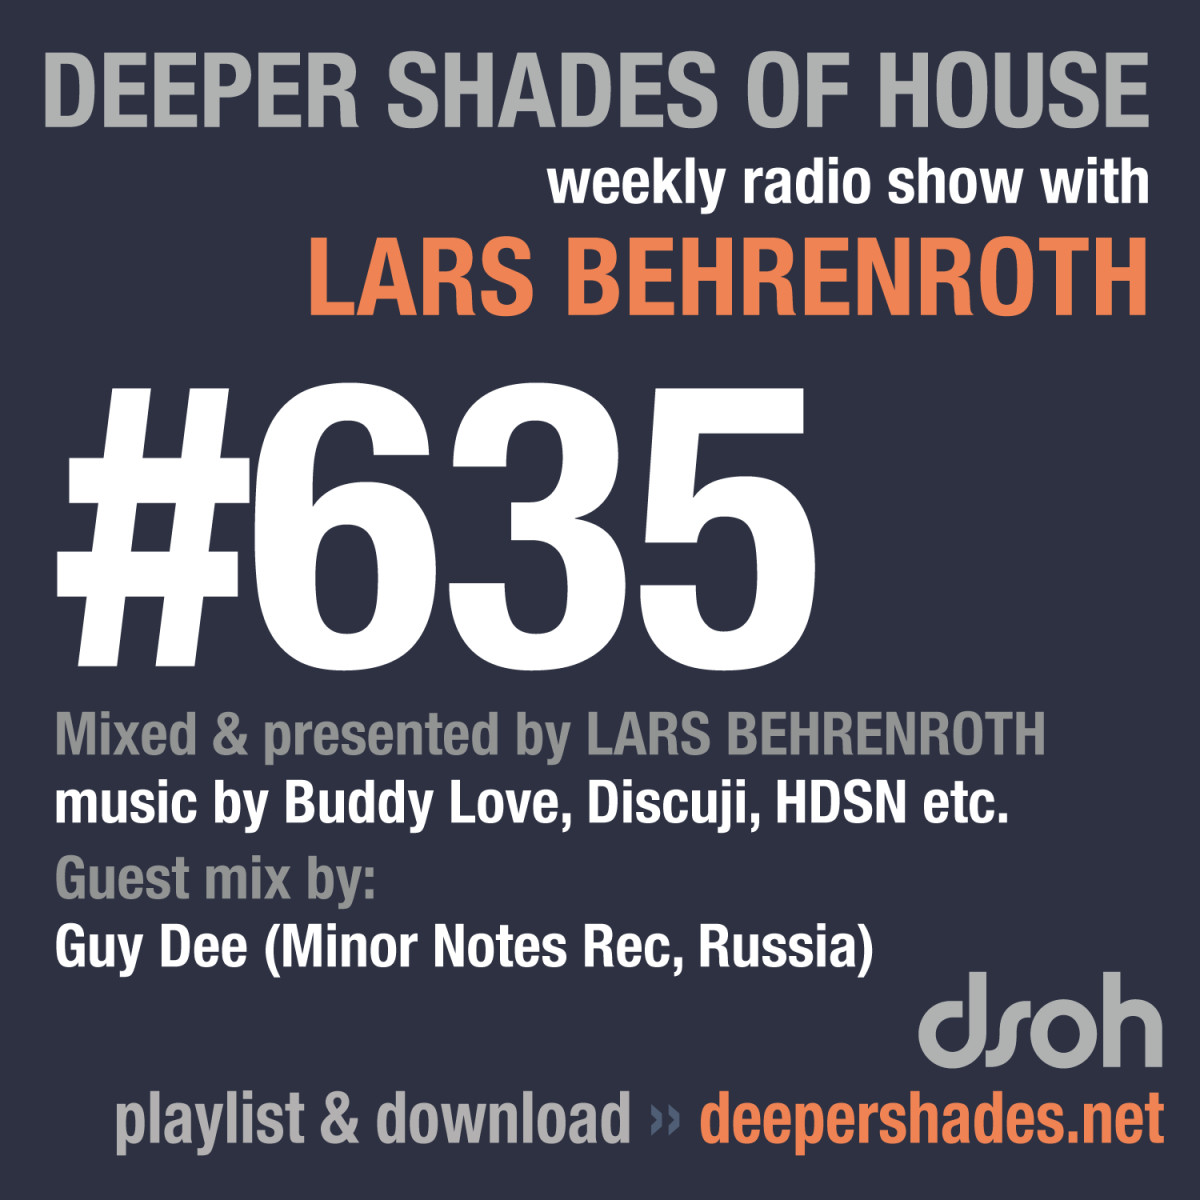 #nowplaying on radio.deepershades.net : Lars Behrenroth w/ excl. guest mix by GUY DEE (Minor Notes Recordings) - DSOH #635 Deeper Shades Of House #deephouse #livestream #dsoh #housemusic